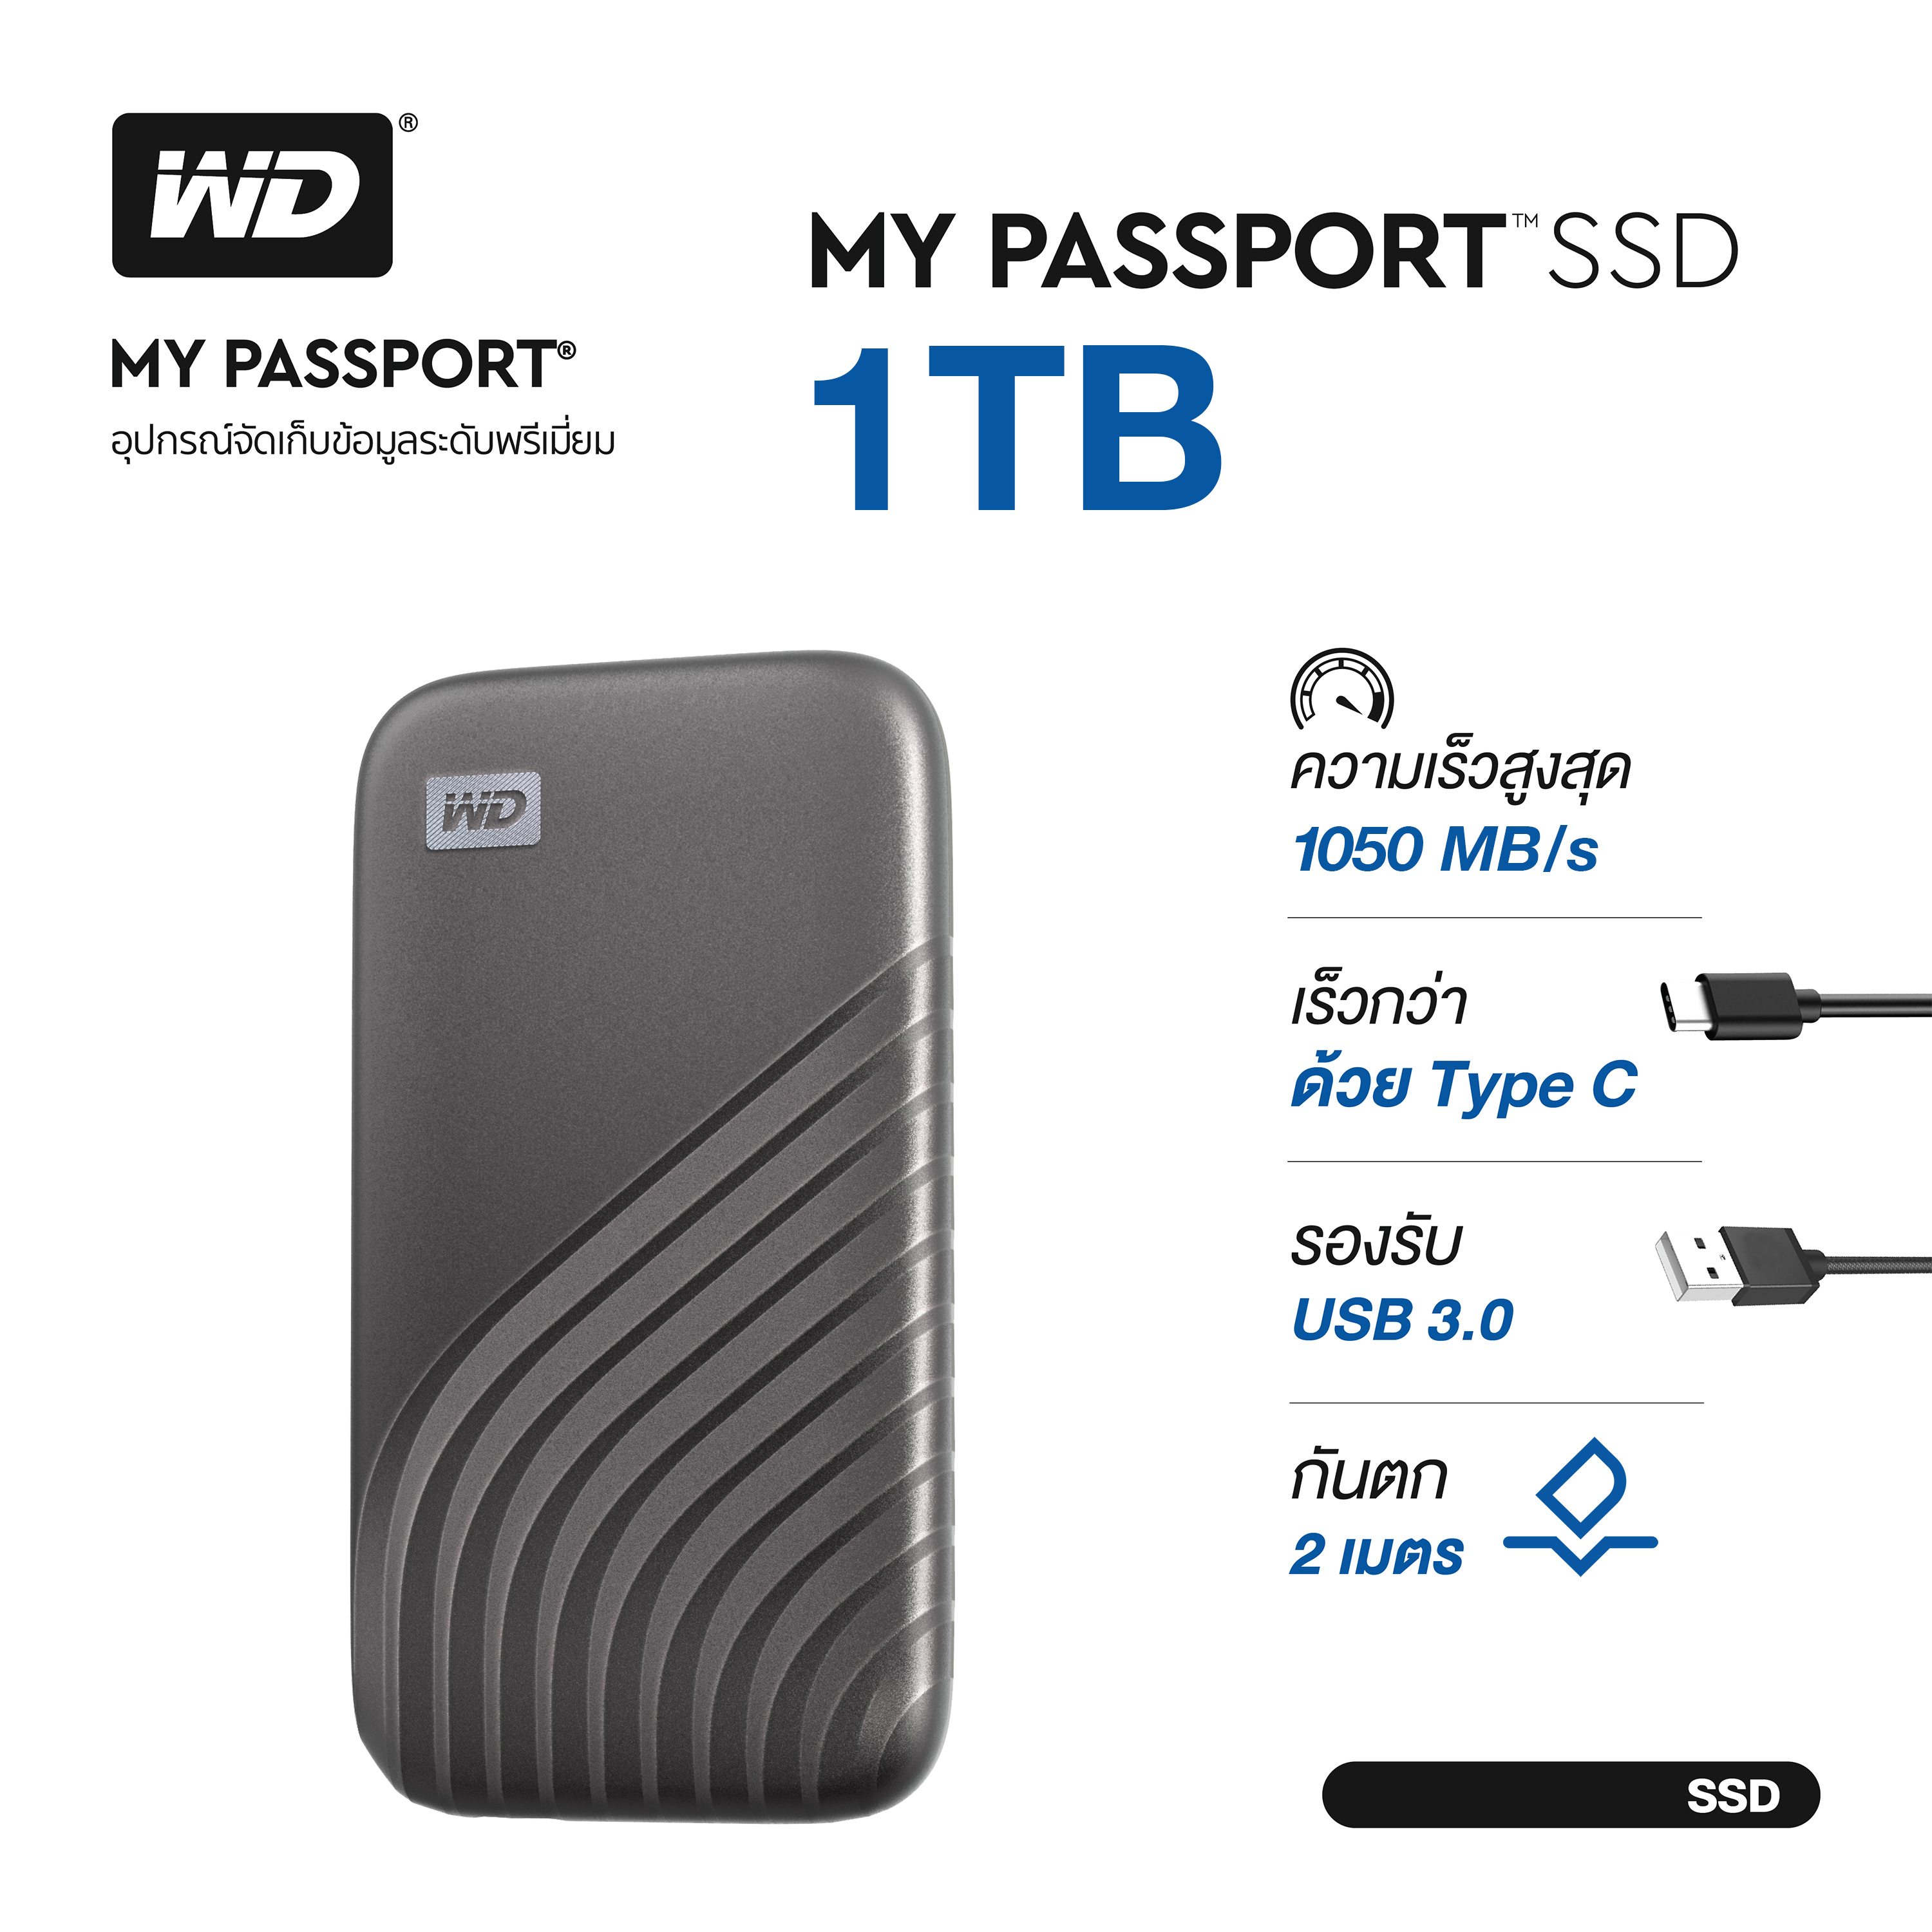 WD My Passport SSD 1TB, Type-C, USB 3.0, Speed up to 1050 MB/s, SSD NVMe ( WDBAGF0010-WESN ) ( เอสเอสดี Solid State Drive )